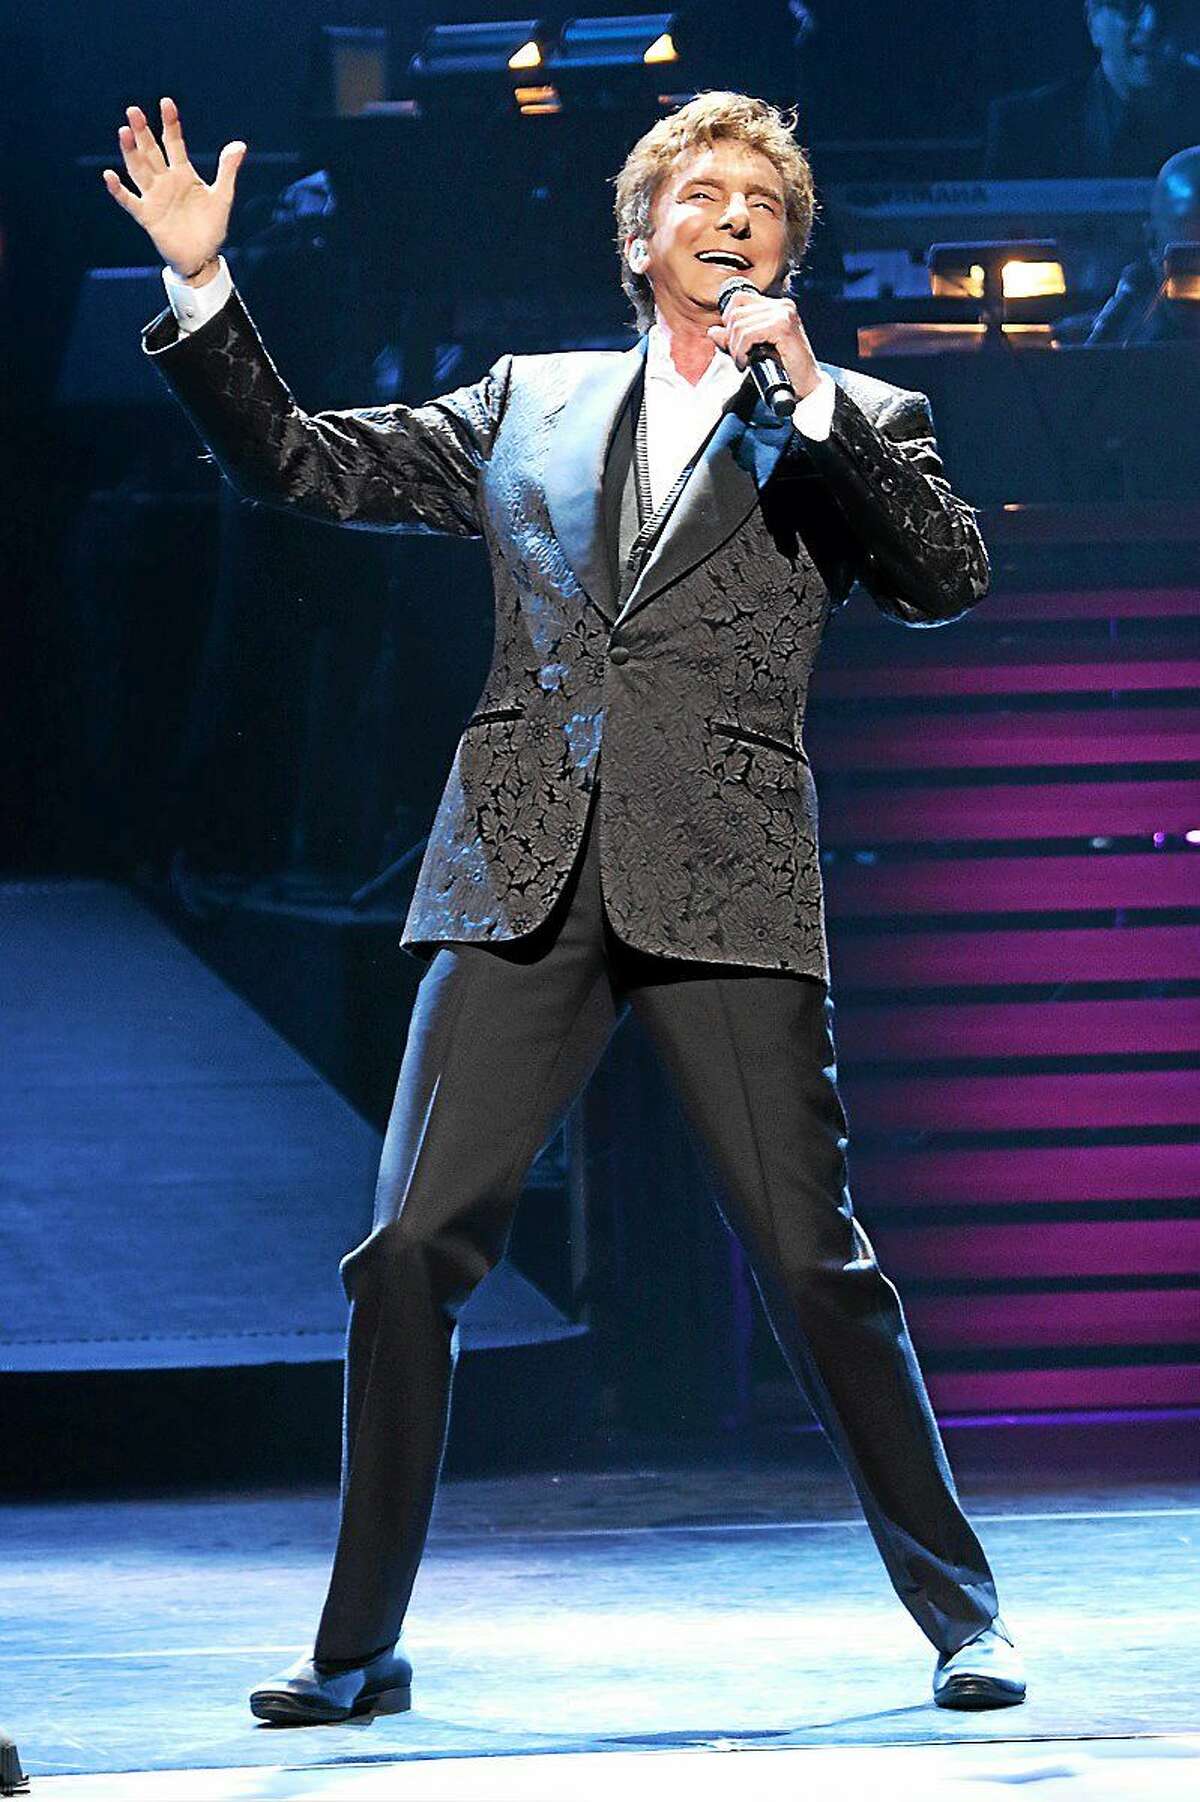 Photo by John Atashian Singer and songwriter Barry Manilow is shown performing on stage at the Foxwoods Resort & Casino in Mashantucket during his concert on March 28. At 71 years old with 51 years in the music business, this living legend is still going strong. He entertained the sold-out crowd of fans to a night full of his biggest hits.